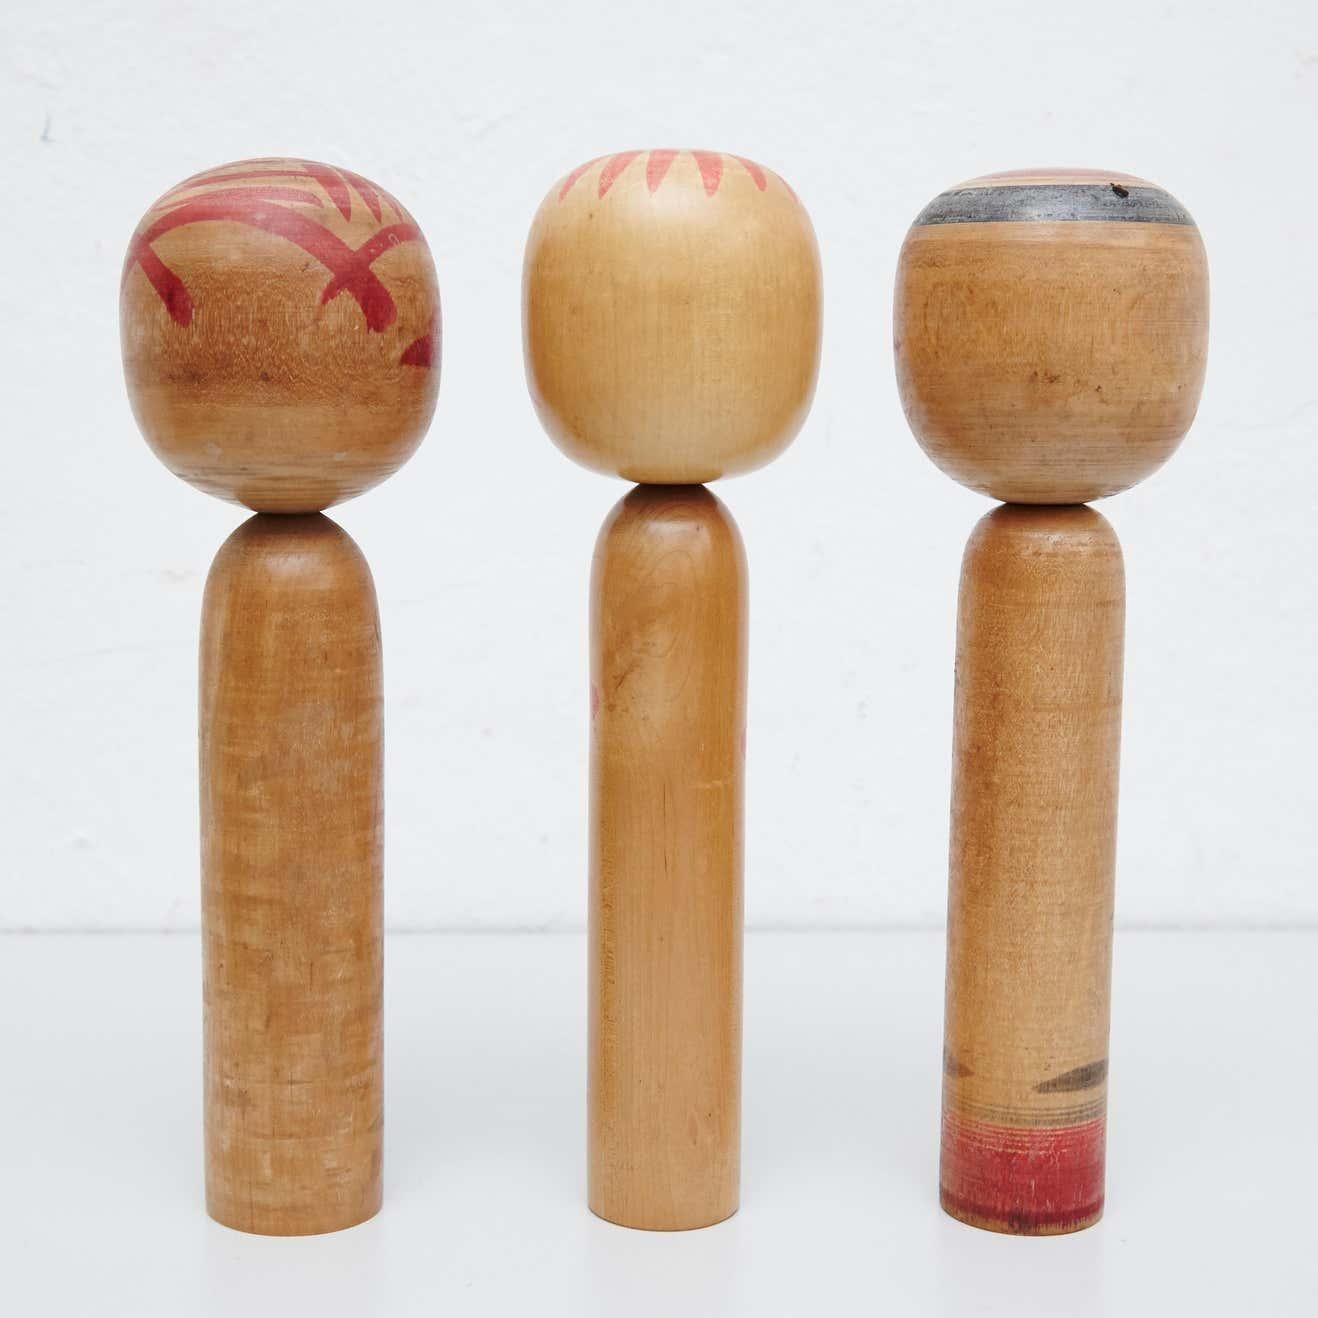 Japanese dolls called Kokeshi of the early 20th century.
Provenance from the northern Japan.
Set of 3.

Measures: 

30 x 9 cm
30.5 x 8.5 cm
30 x 9 cm


Handmade by Japanese artisans from wood. Have a simple trunk as a body and an enlarged